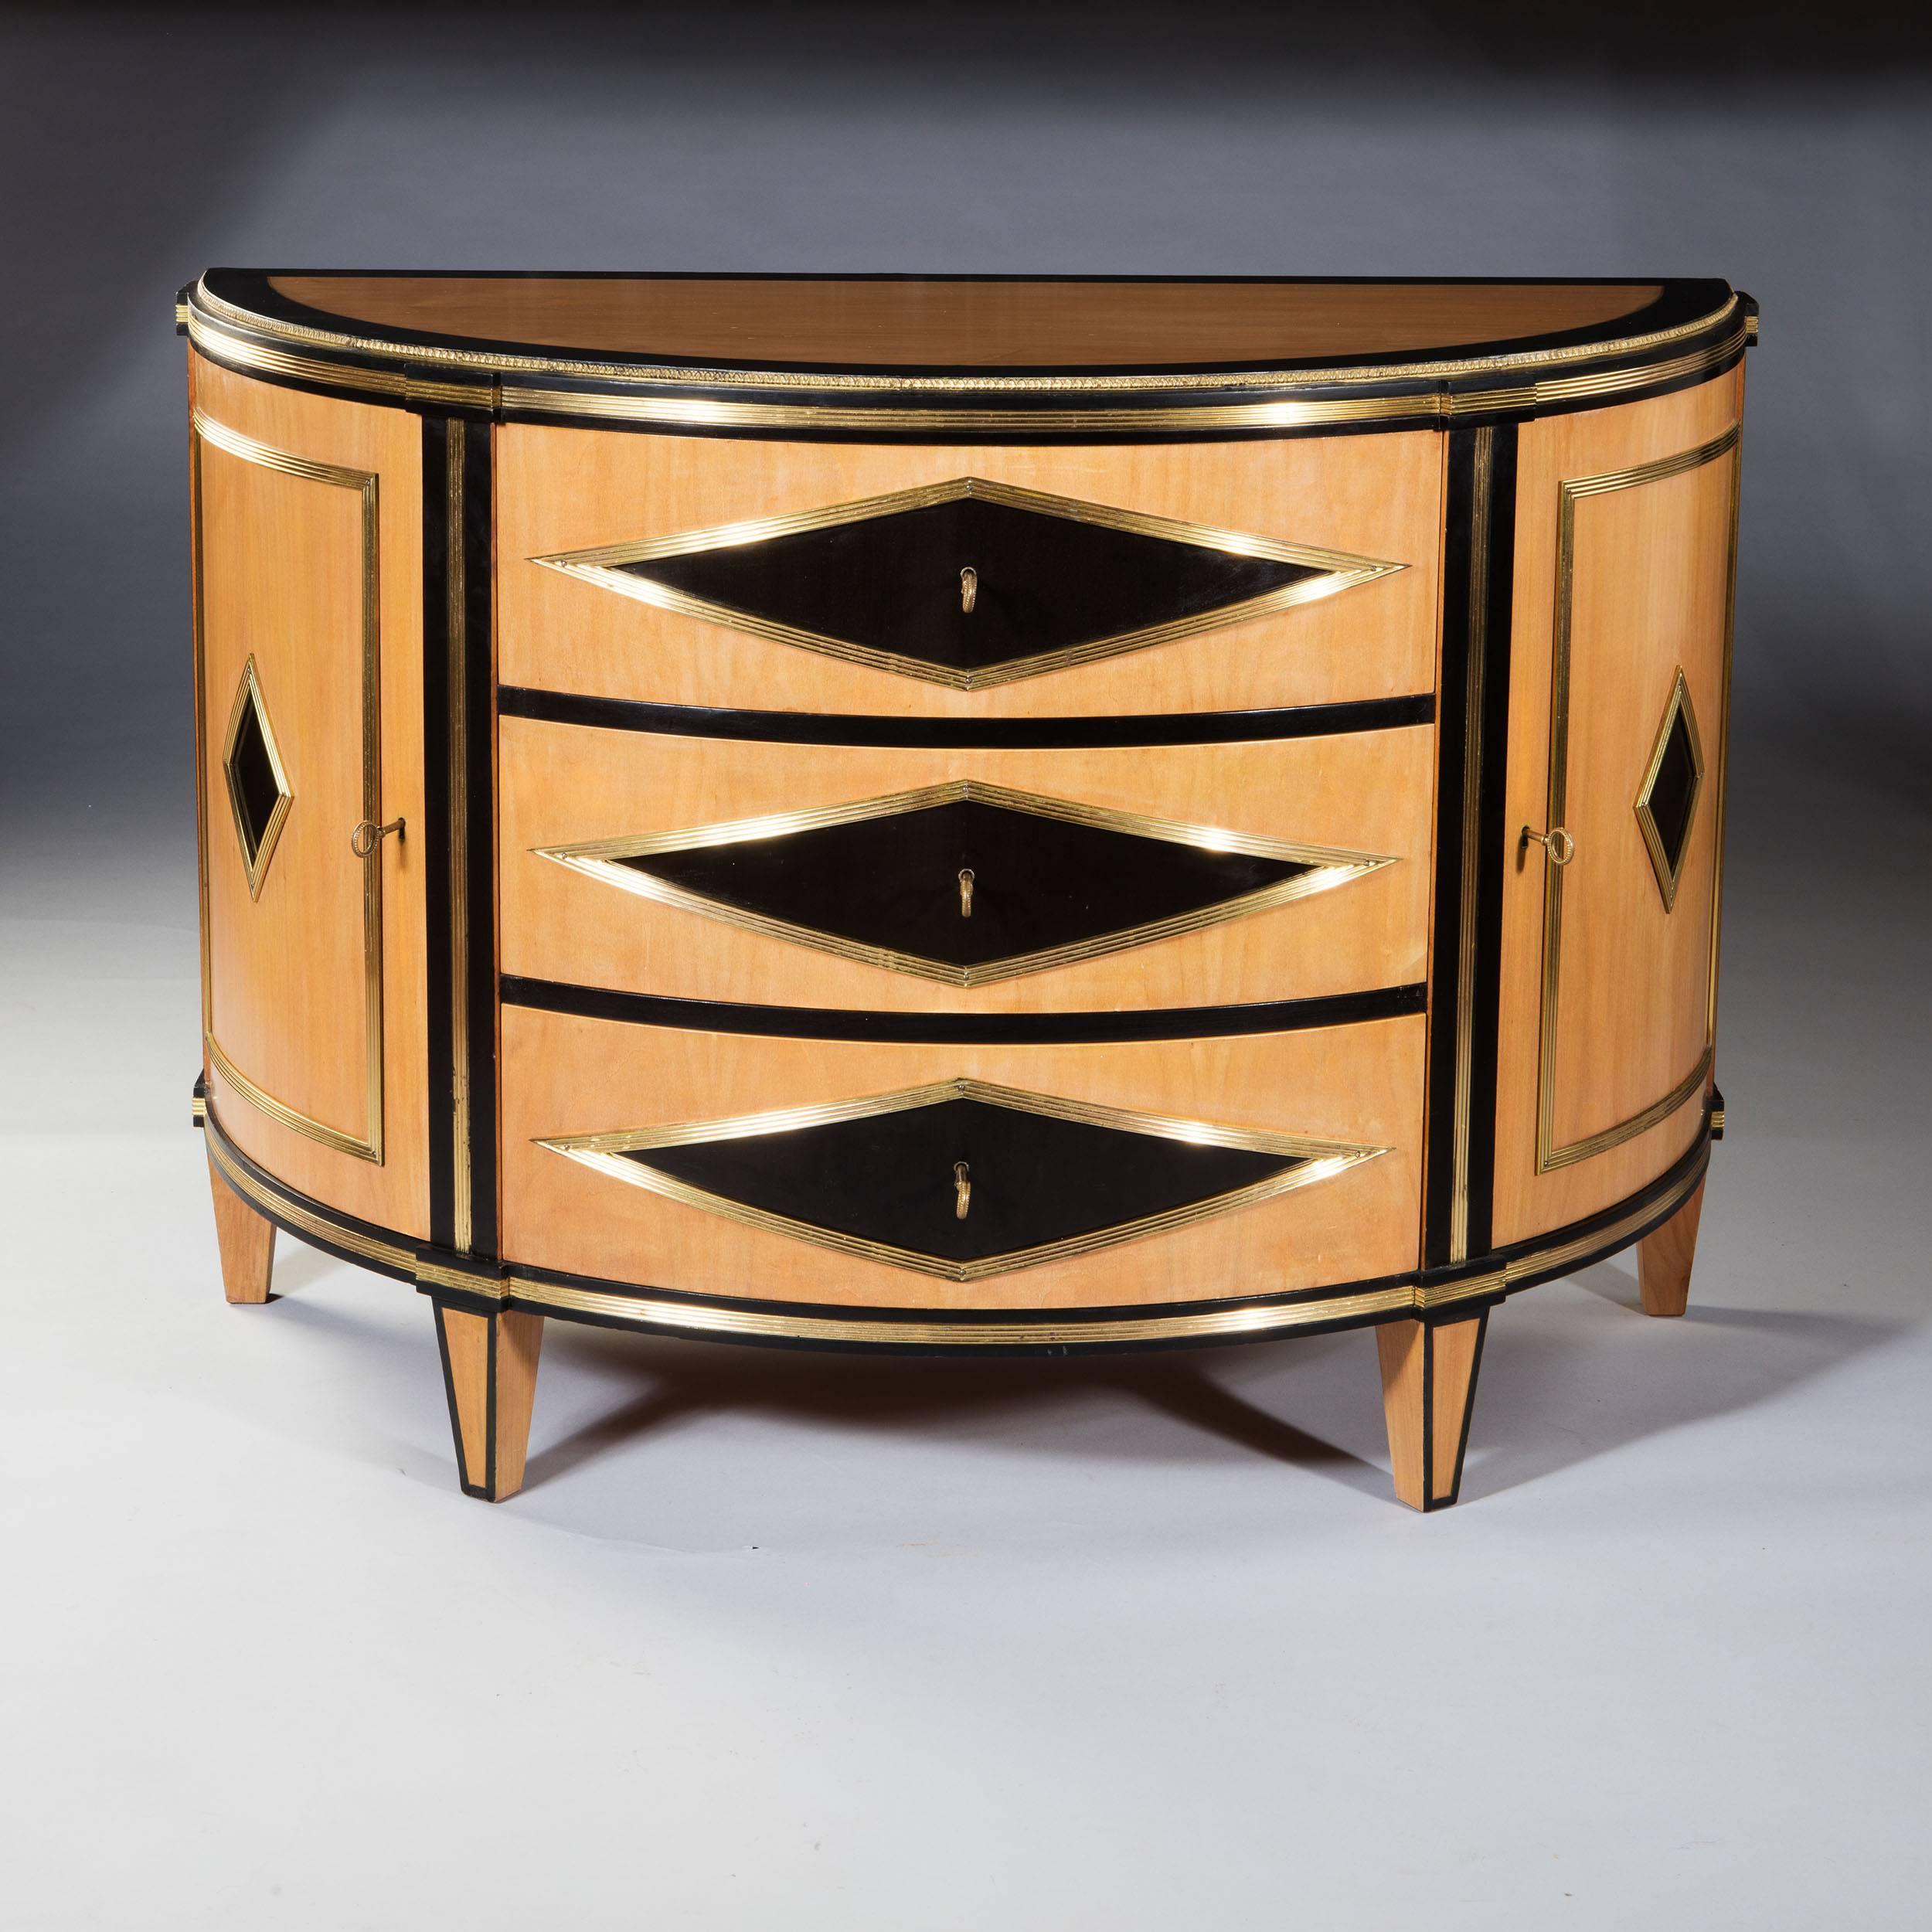 A fine early 20th century maple and ebonized demilune commode with three drawers and side cupboards, all supported on toupie feet.